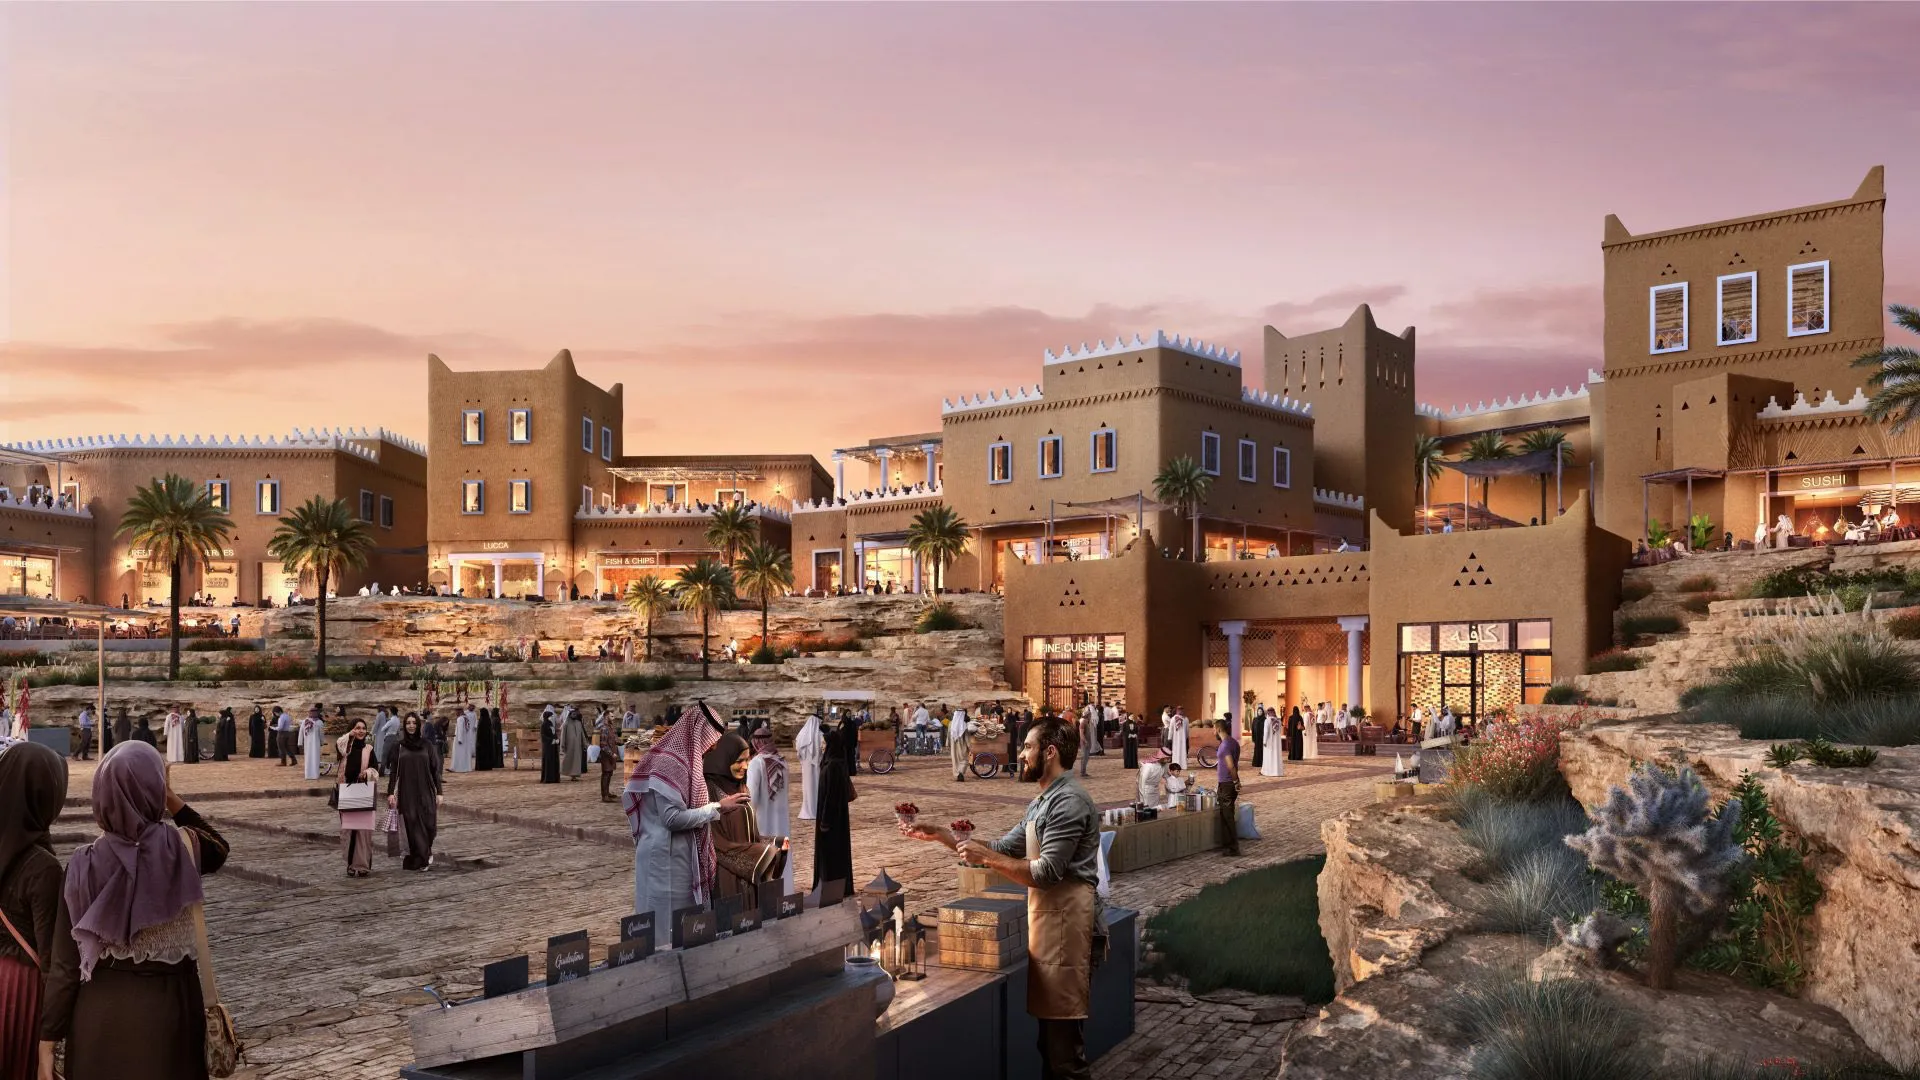 🌟 Get ready for The Diriyah Gate project, a game-changing opportunity in Saudi Arabia. 🇸🇦

DiriyahGate: A visionary mega-project transforming historic Diriyah into a world-class destination.

🔹 Cultural Hub: Experience restored heritage sites, museums, and art galleries.
🔹 Business District: Thrive in a cutting-edge ecosystem with state-of-the-art infrastructure.
🔹 Hospitality & Tourism: Cater to global travelers with luxurious hotels and resorts.
🔹 Retail & Entertainment: Tap into a vibrant market with high-end shops and entertainment venues.
🔹 Sustainability Focus: Showcase green initiatives and renewable energy solutions.

Impressive figures:
✨ Over $20 billion investment.
✨ 7 million square meters of development.
✨ 20+ luxury hotels.
✨ 100+ restaurants and cafes.
✨ 200+ retail outlets.
✨ 300+ art and cultural events annually.